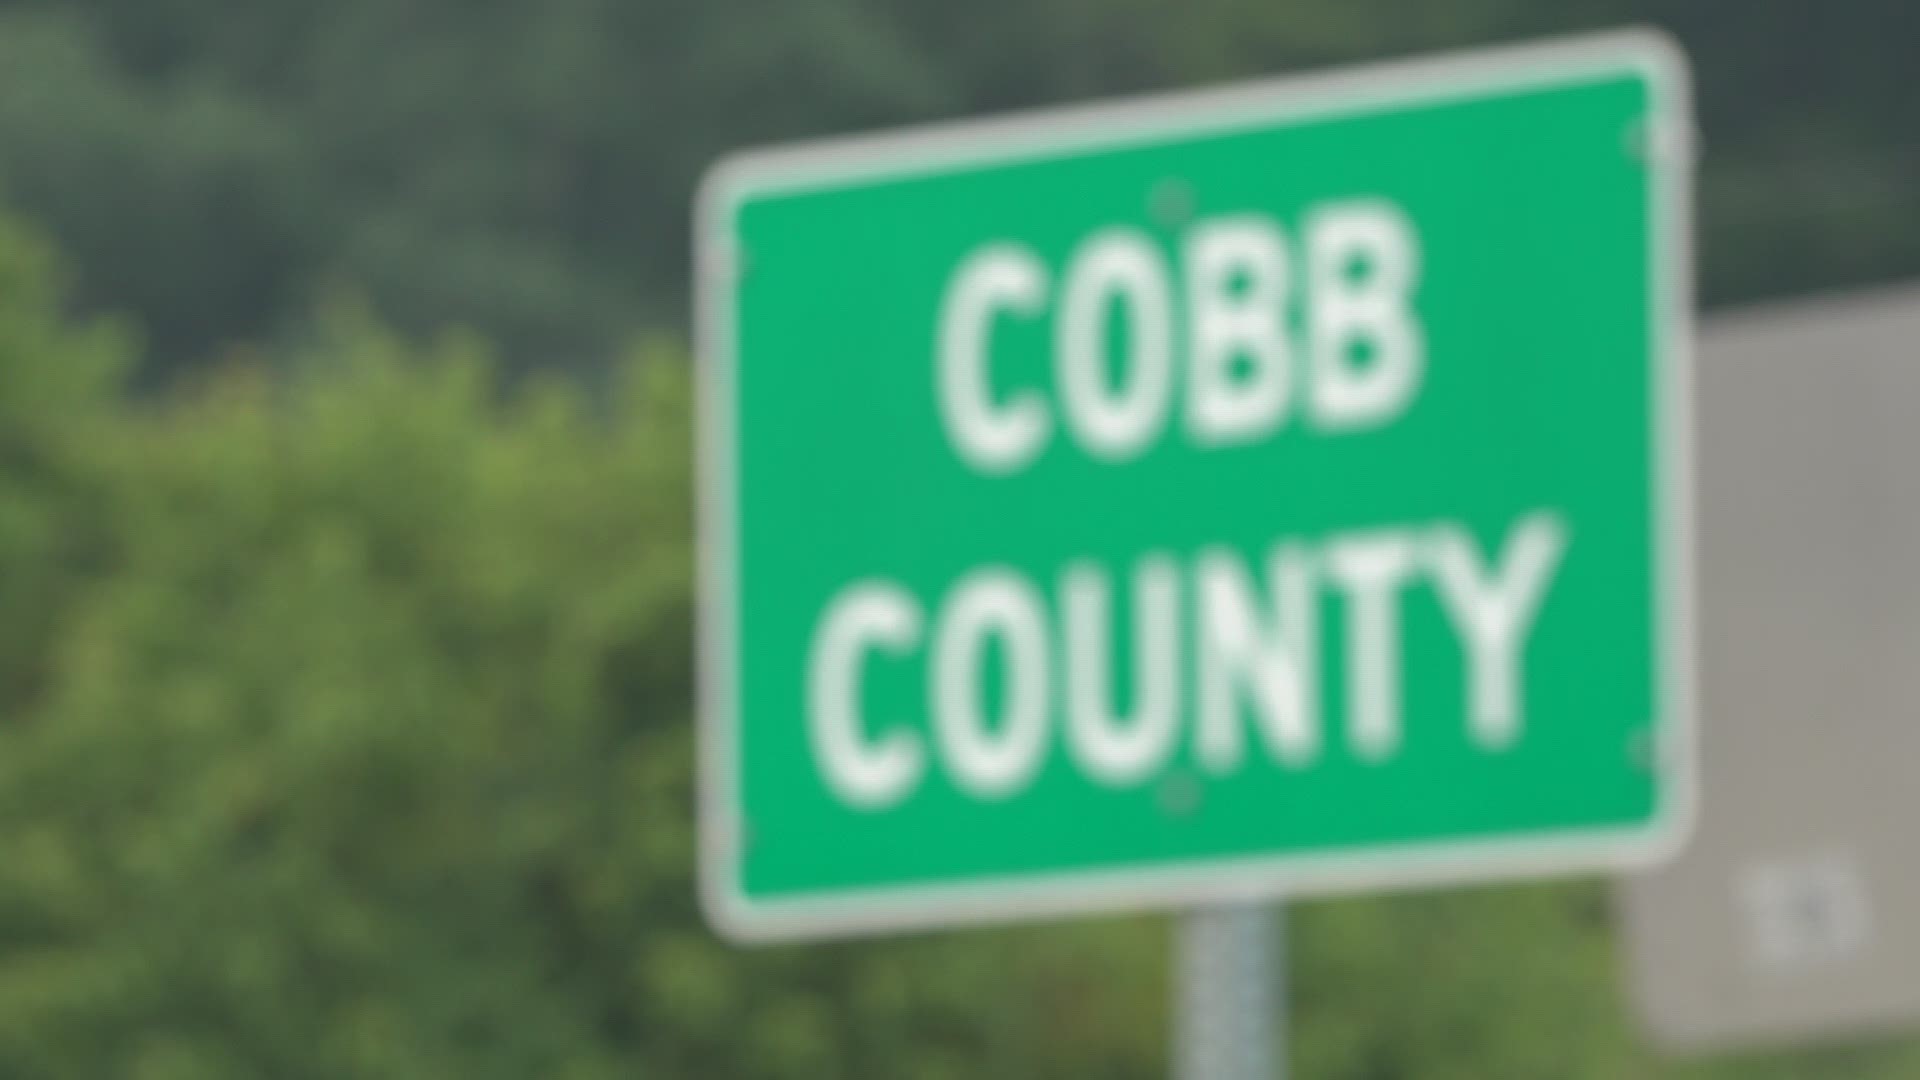 Some believe East Cobb should become its own city, but others argue that’s not necessary.